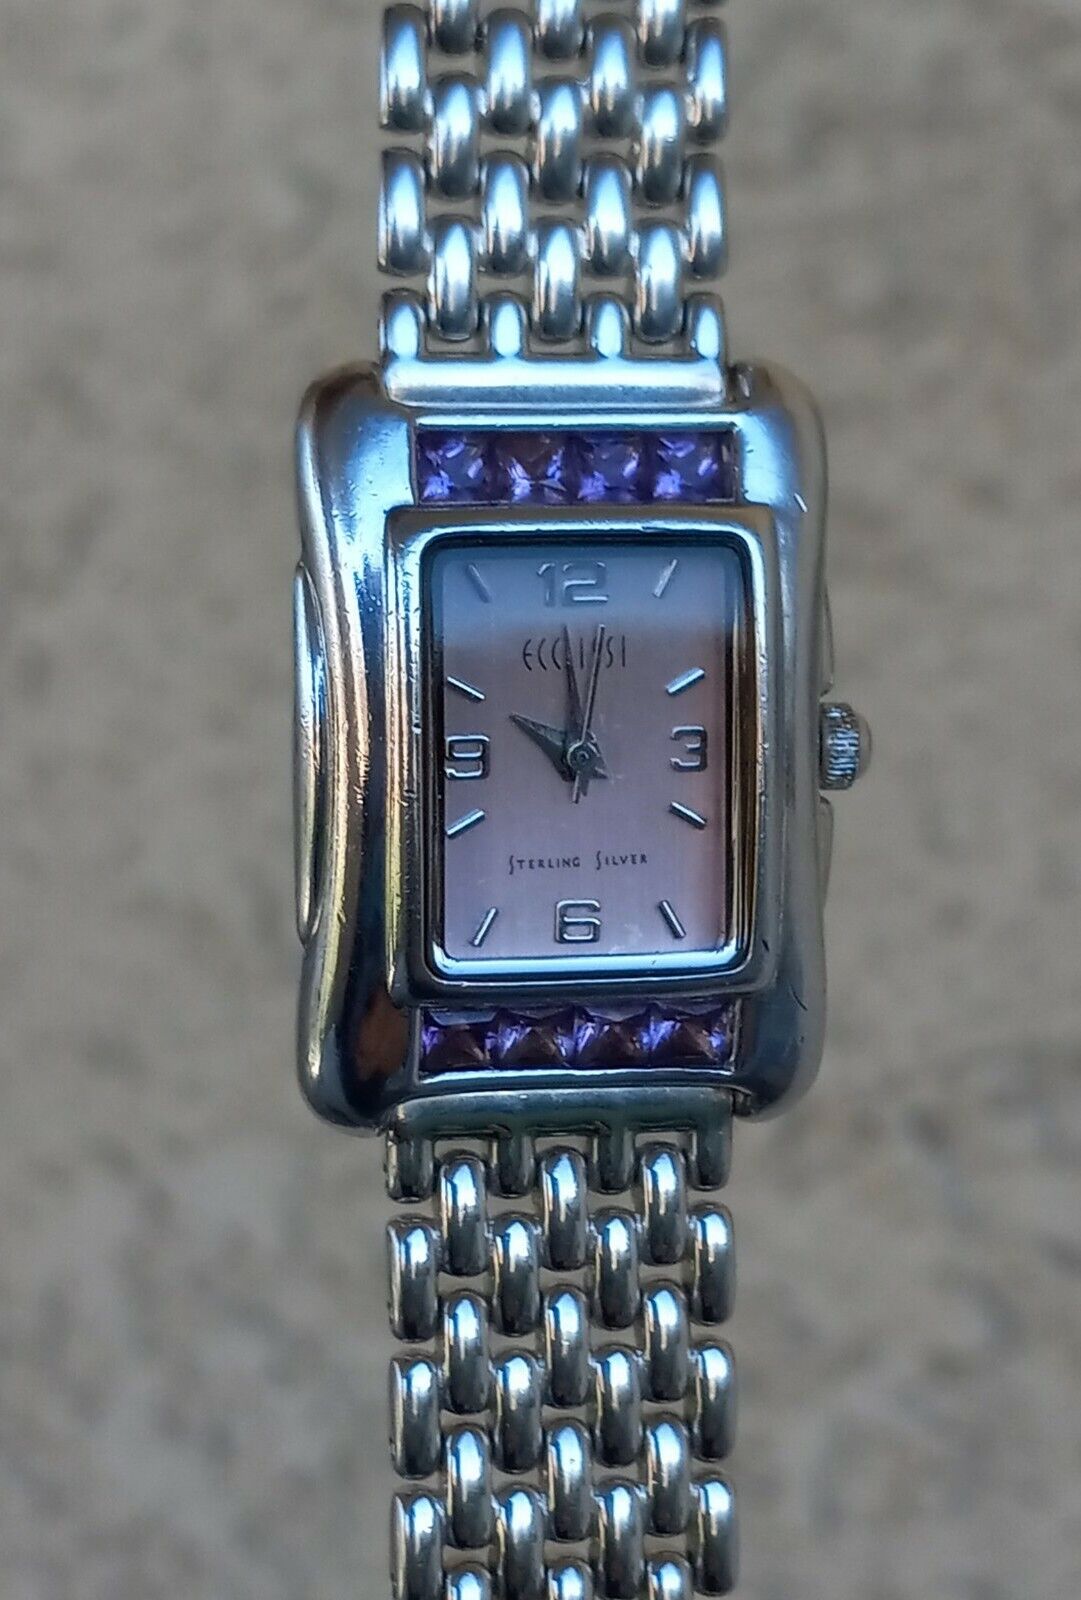 Ecclissi Sterling Silver Amethyst Watch with Panther Bracelet 6.5" WORKING